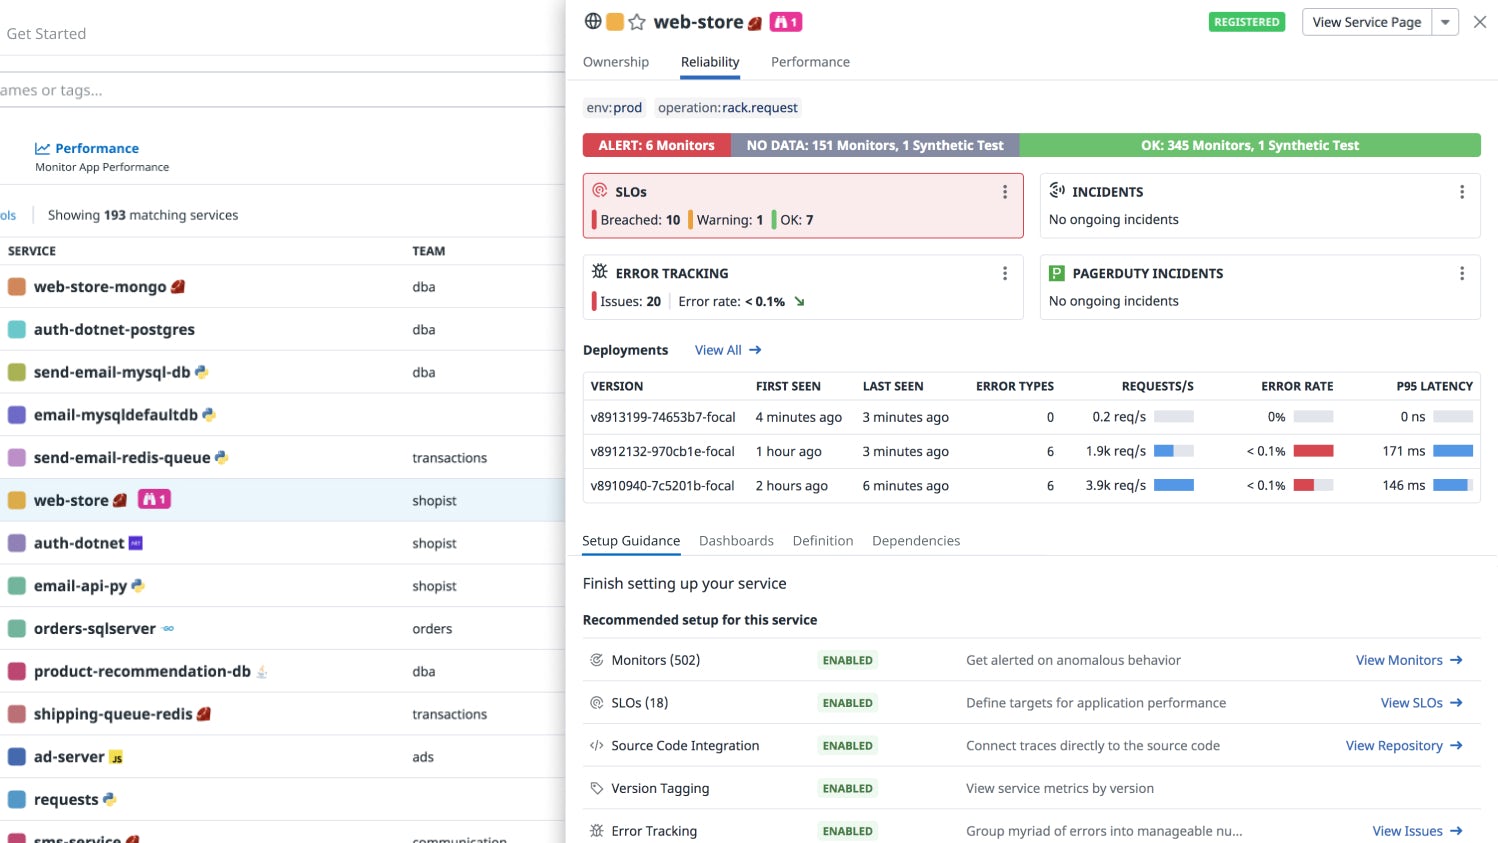 Confidently release new versions by tracking deployments and performance metrics in a single view